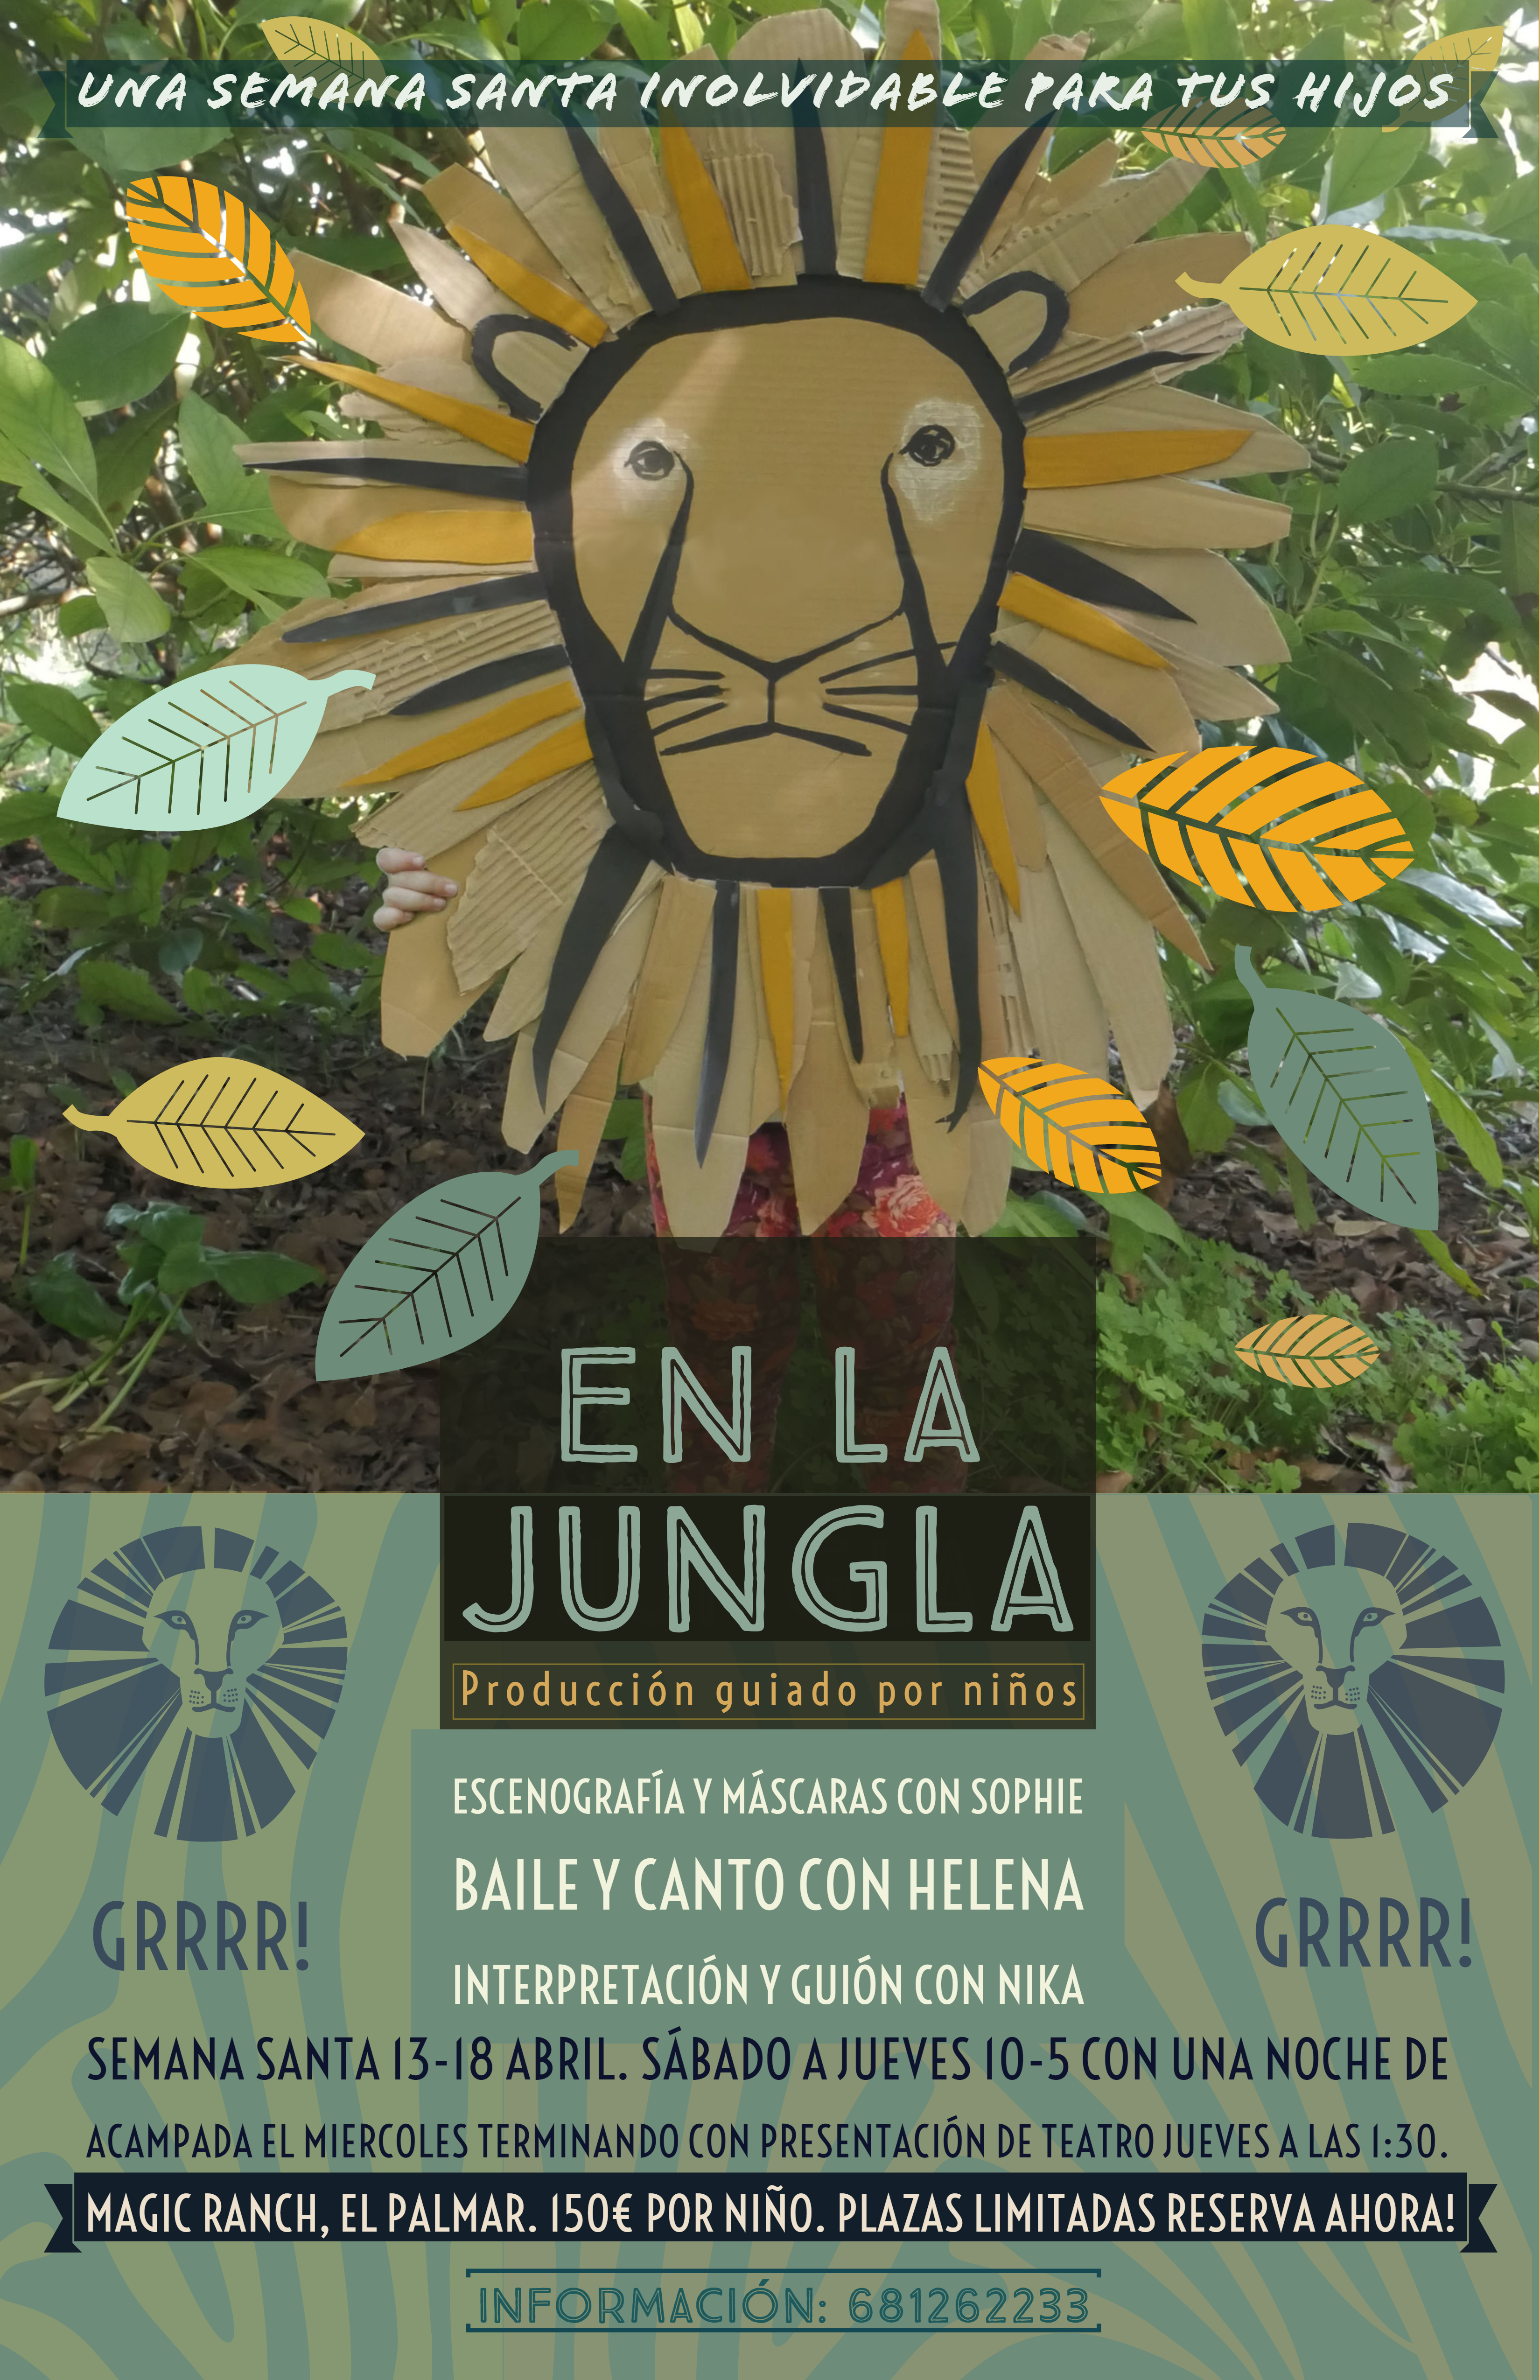 In the jungle guided production by children